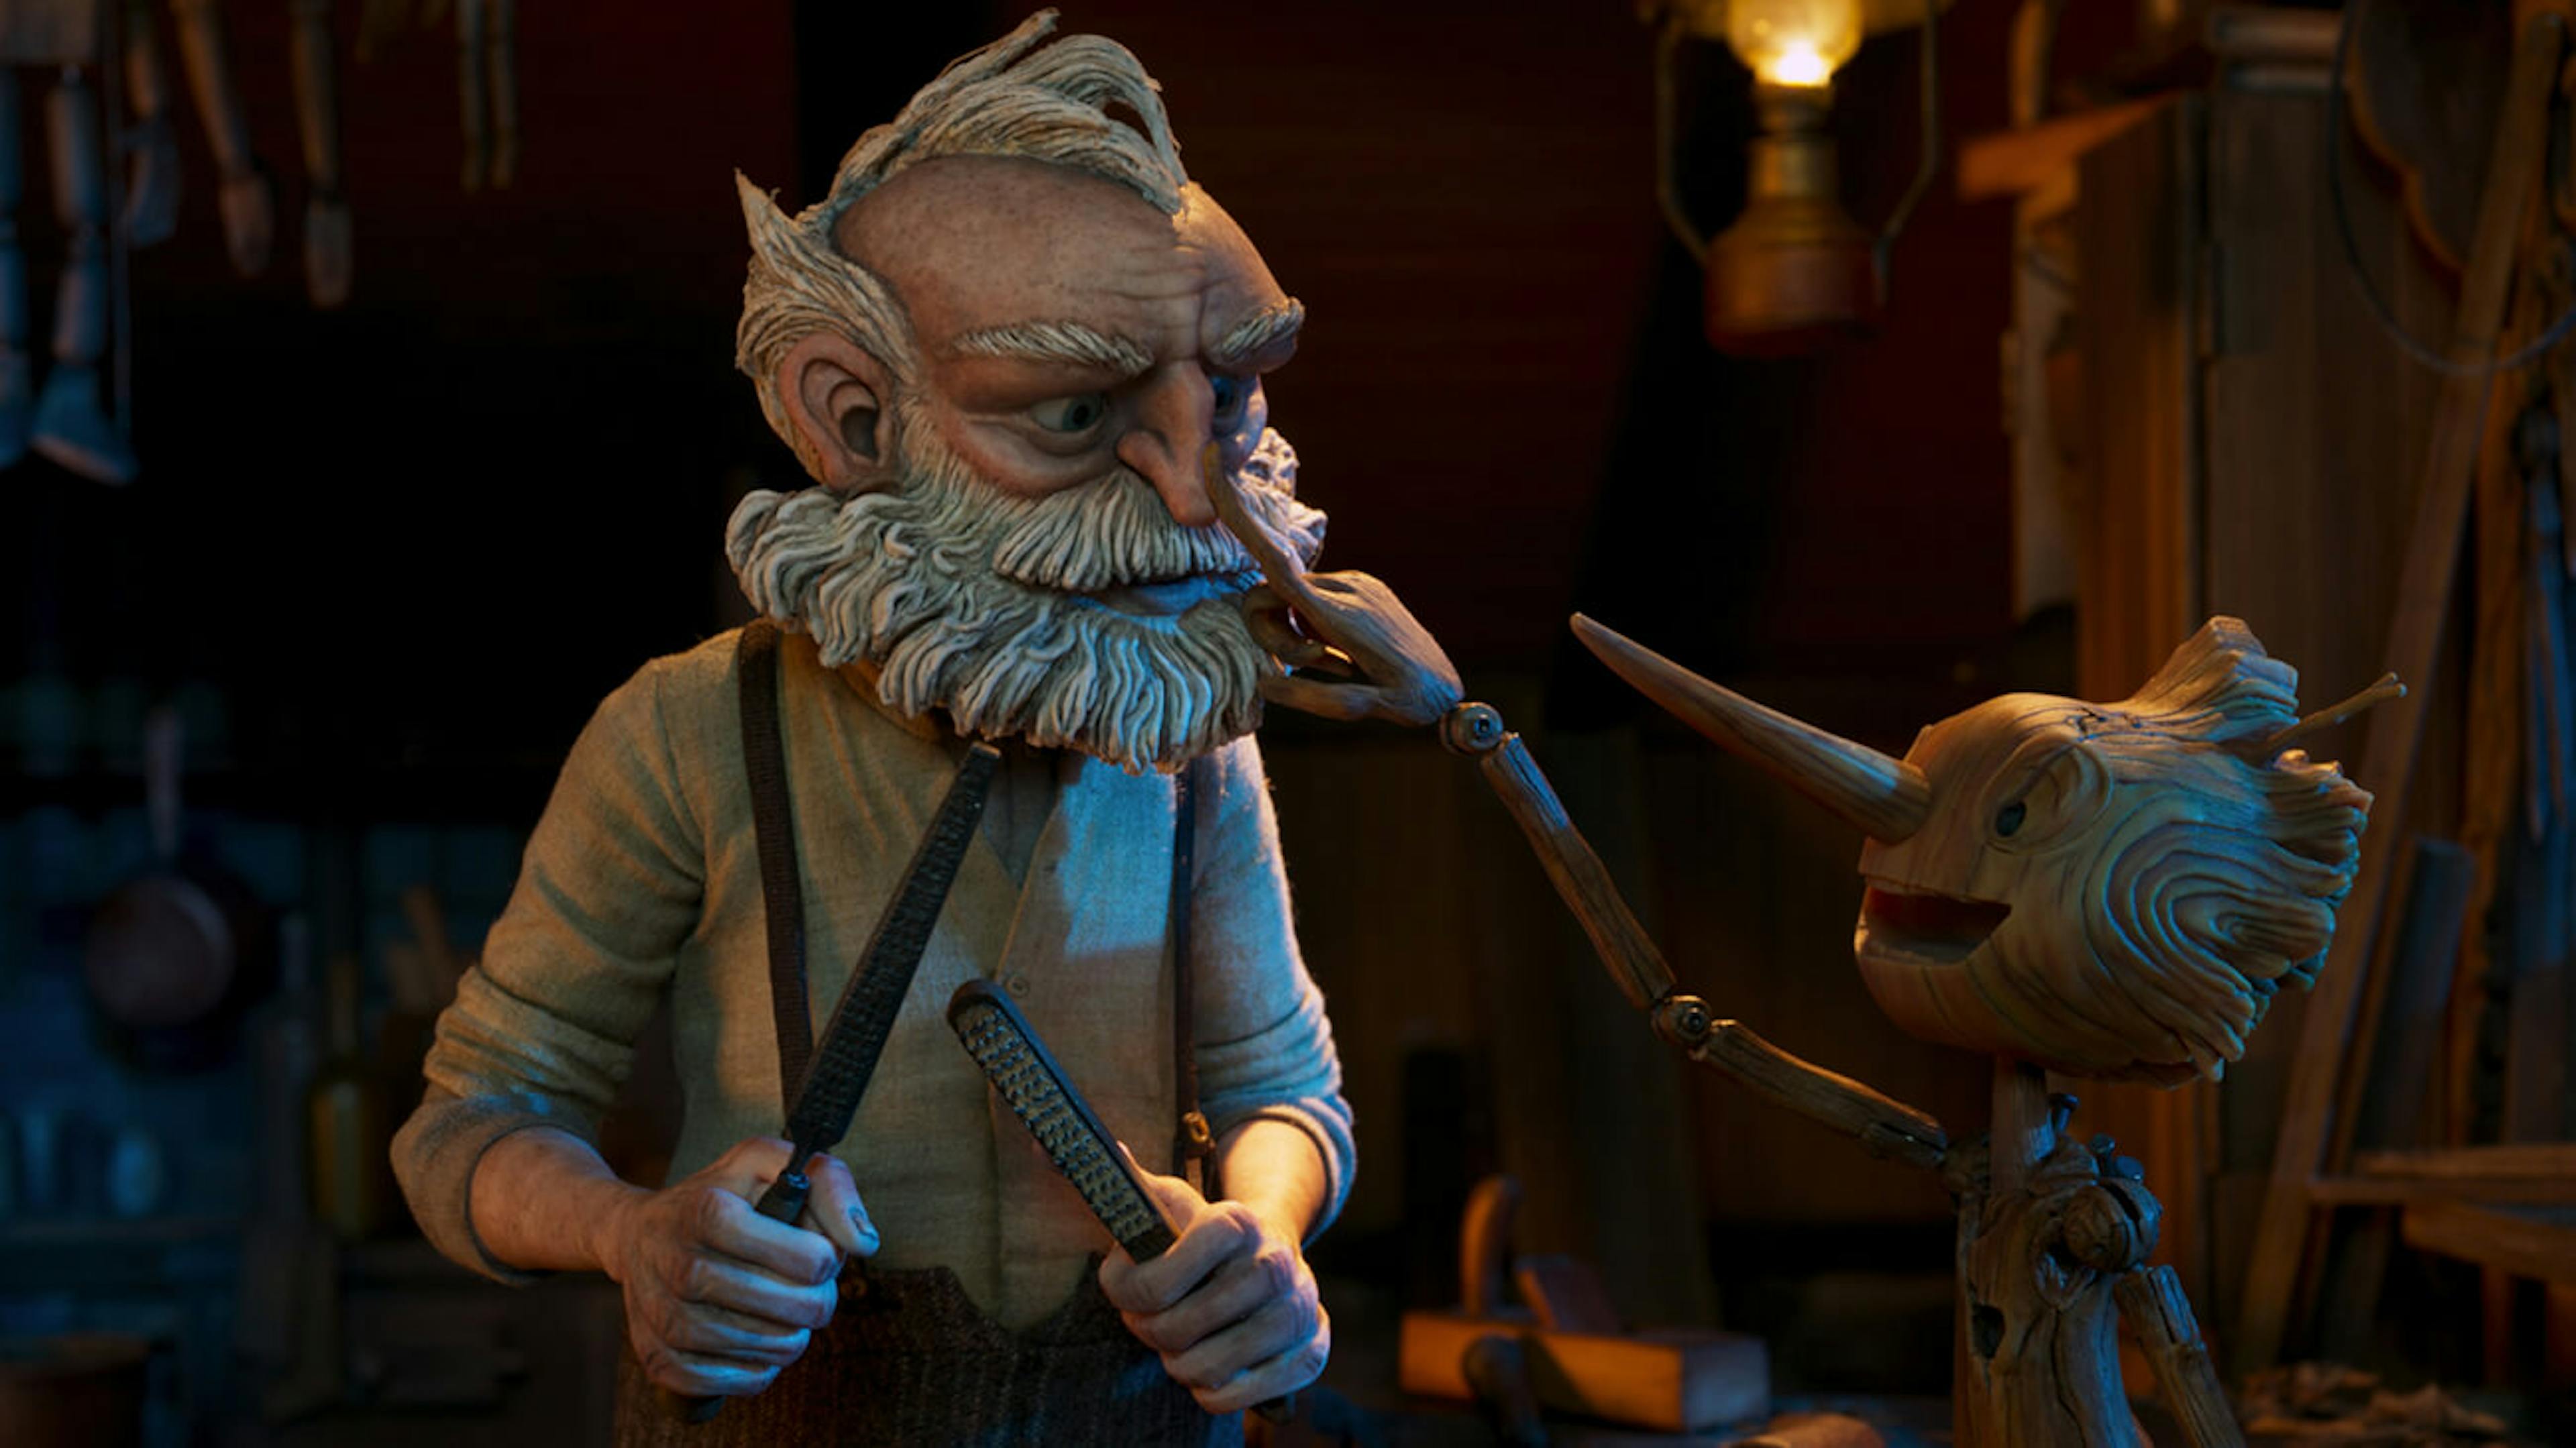 Still from the movie Pinocchio